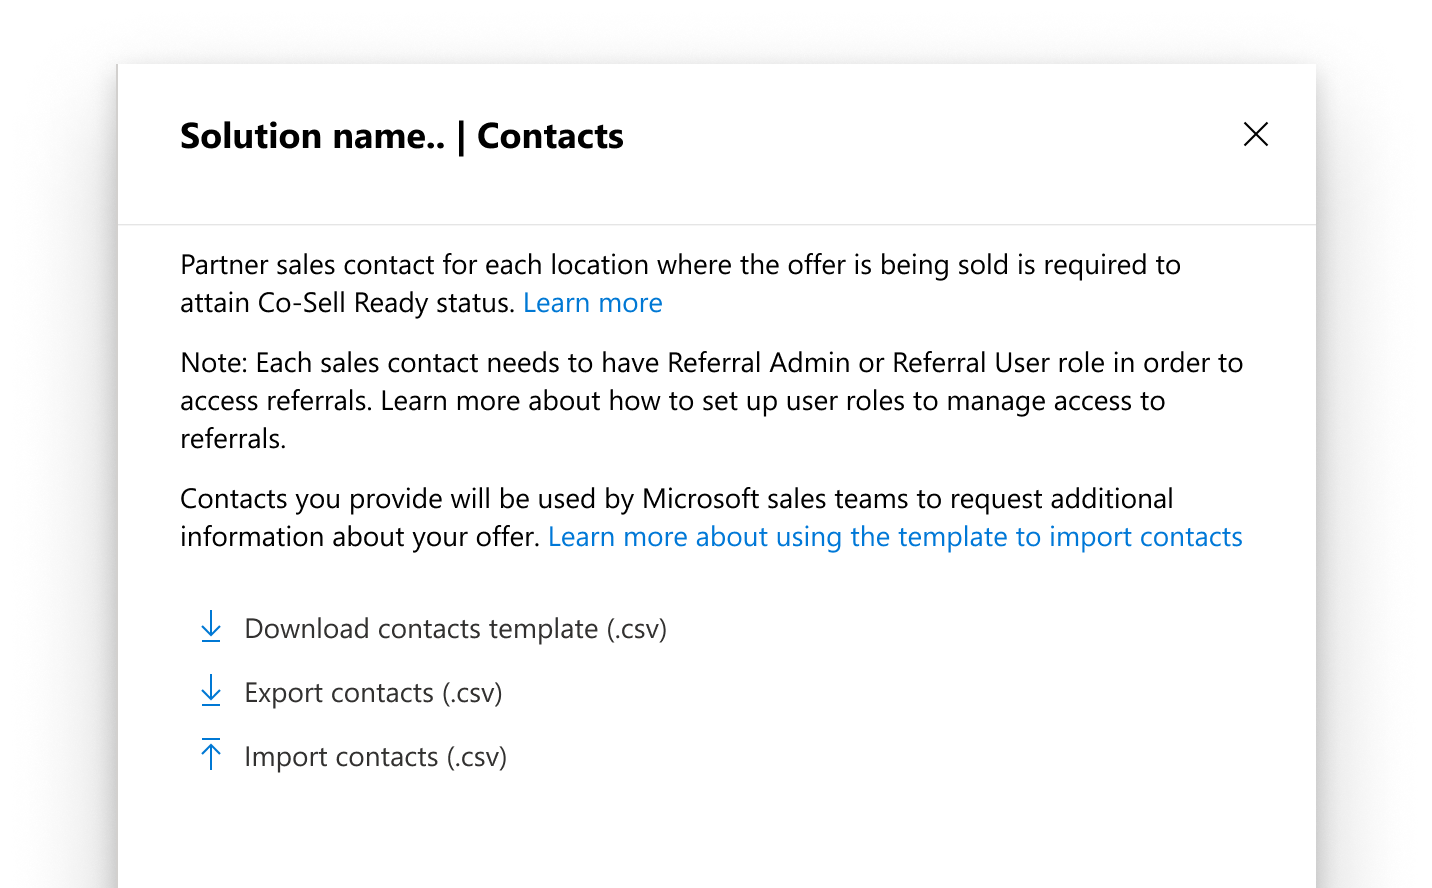  Screenshot shows the Contacts section of the Co-sell > Solutions forms.